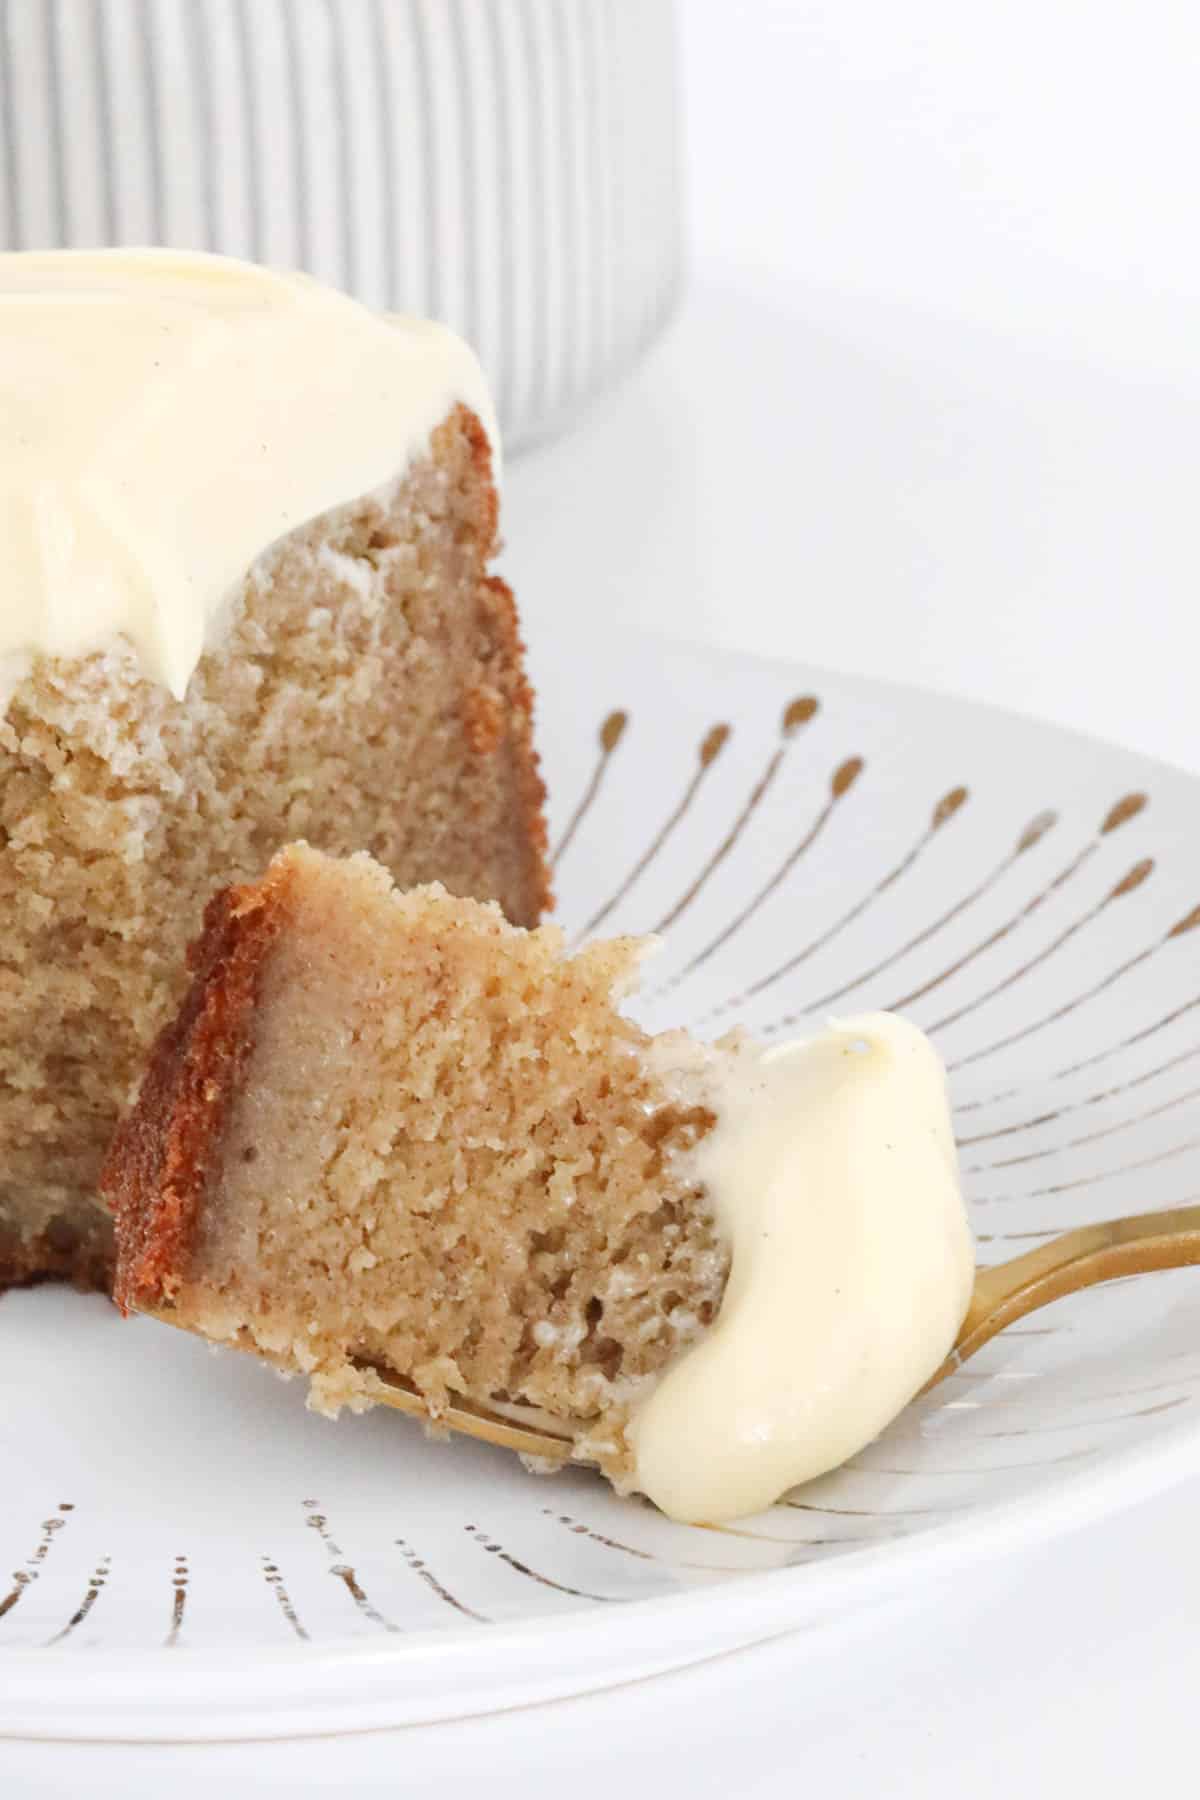 A gold patterned cake plate with a piece of frosted banana cake on a fork